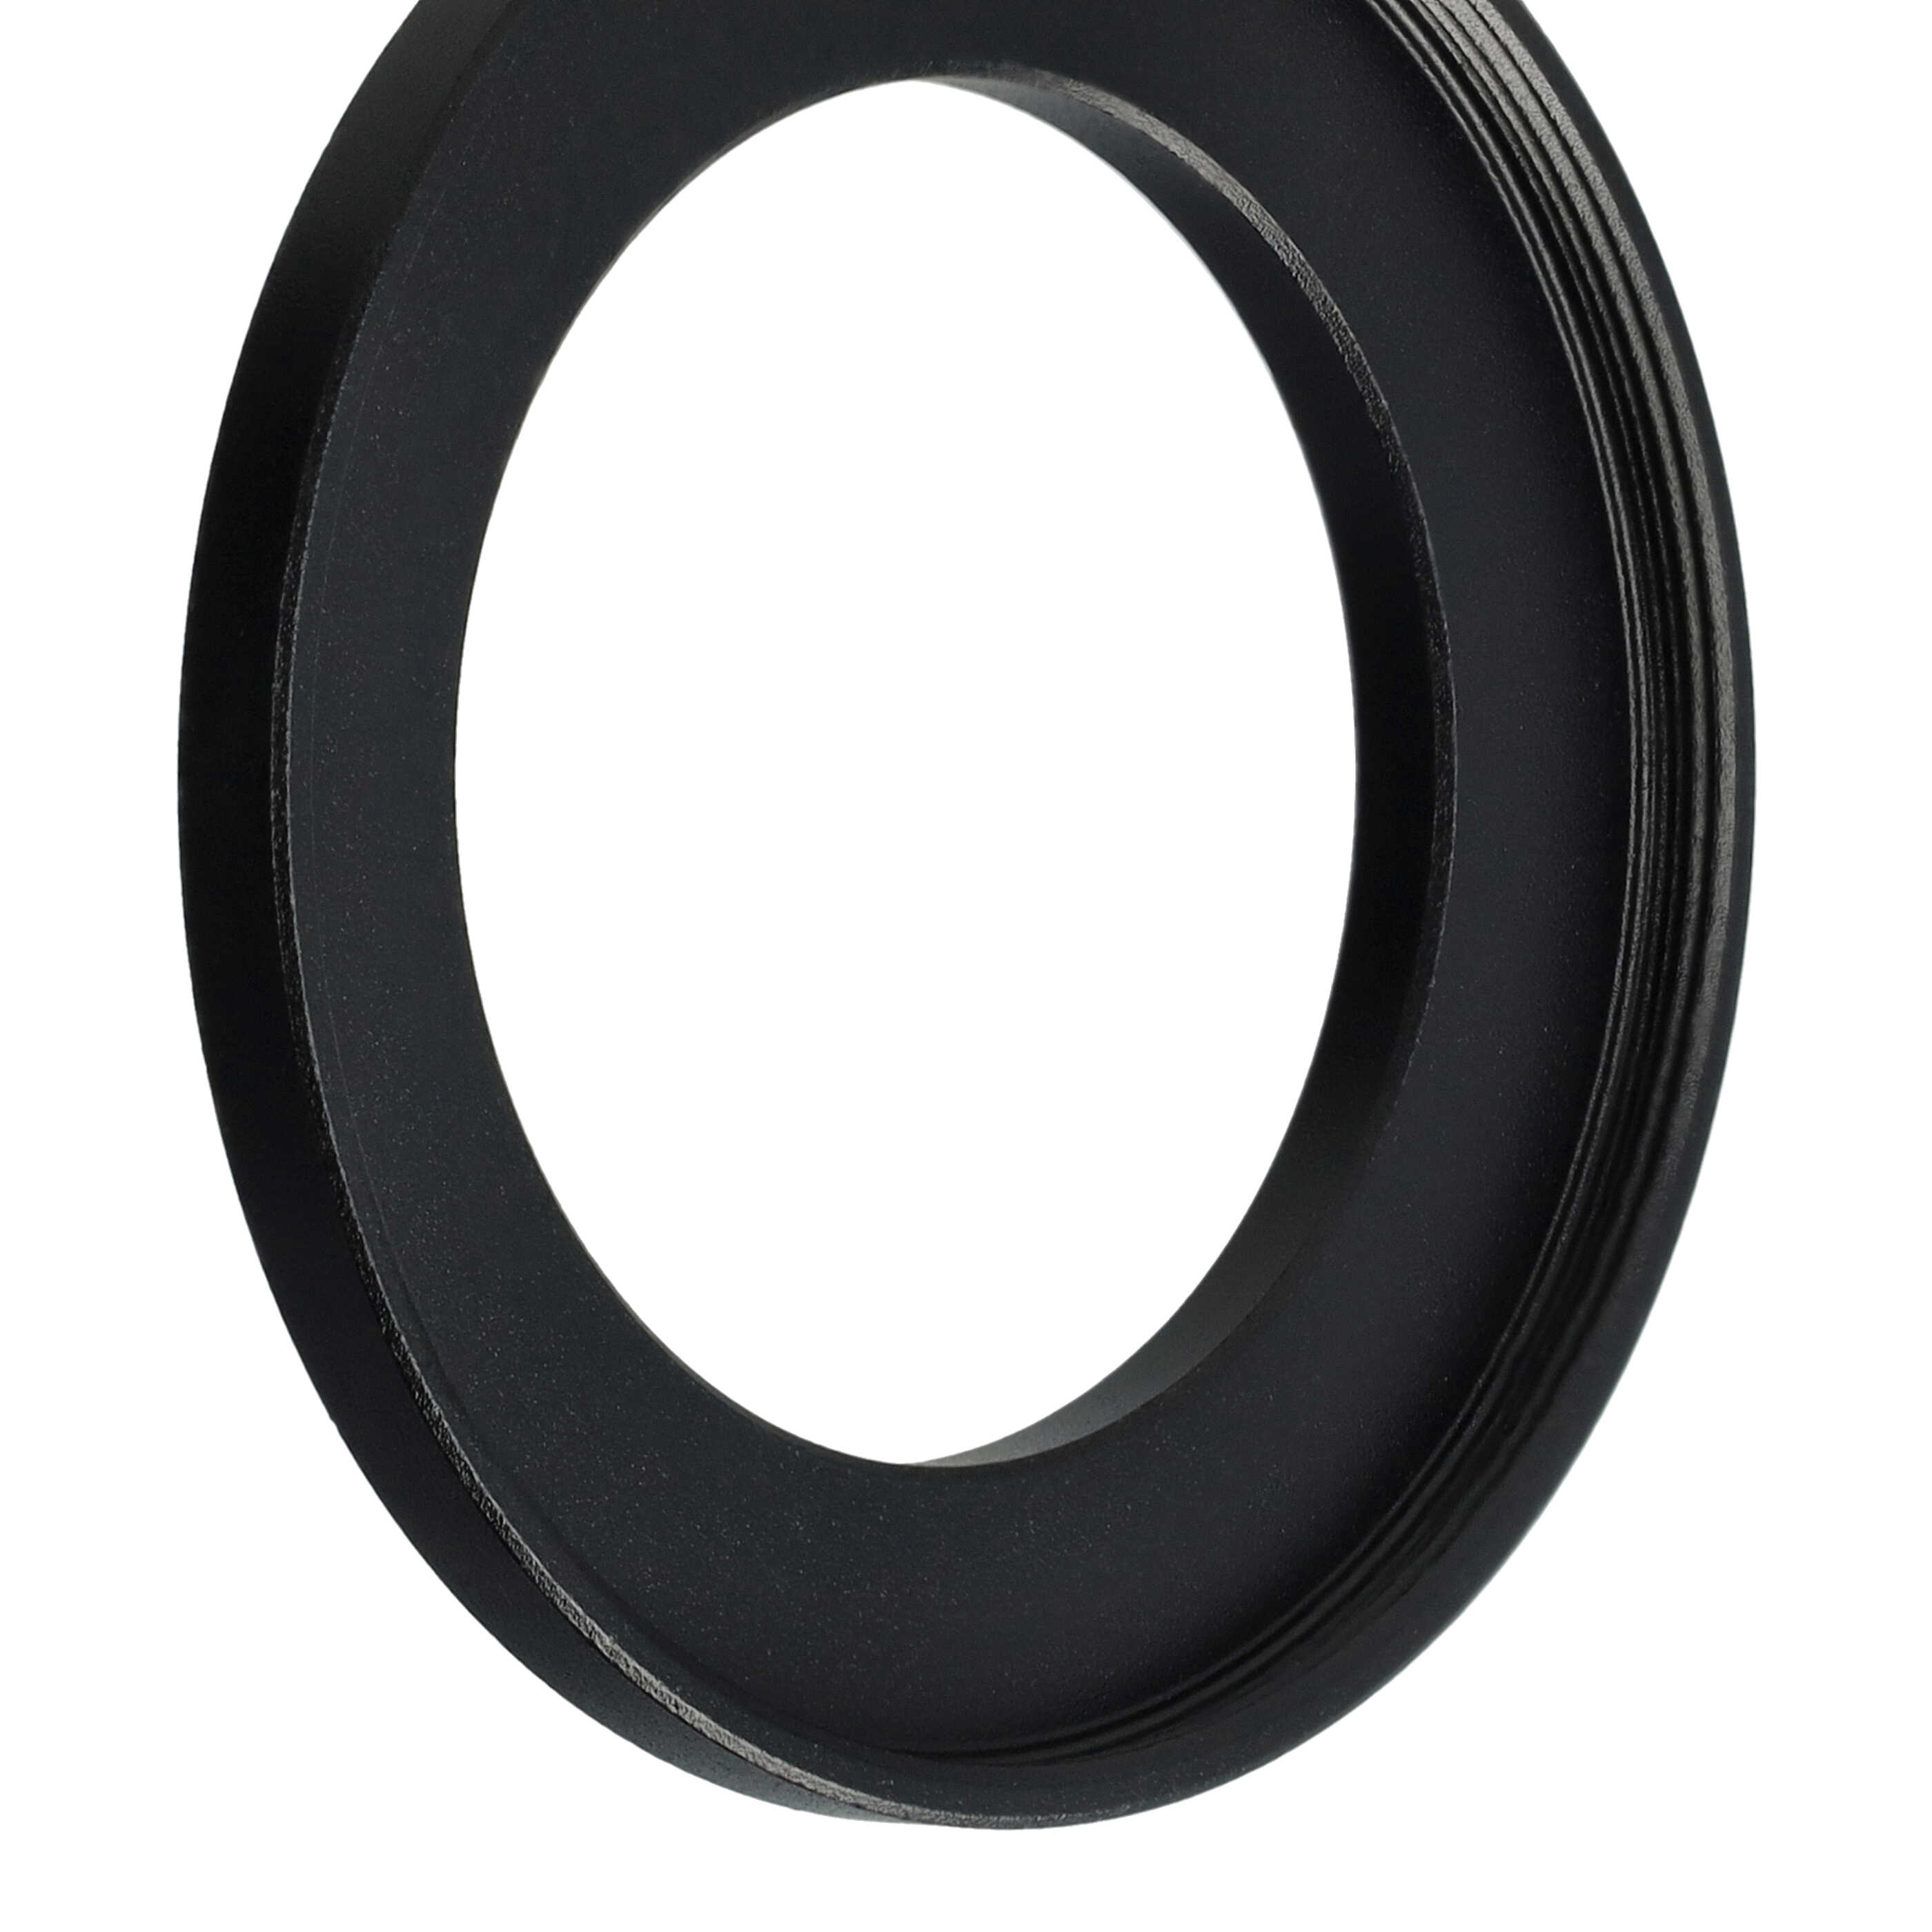 Step-Up Ring Adapter of 37 mm to 49 mmfor various Camera Lens - Filter Adapter